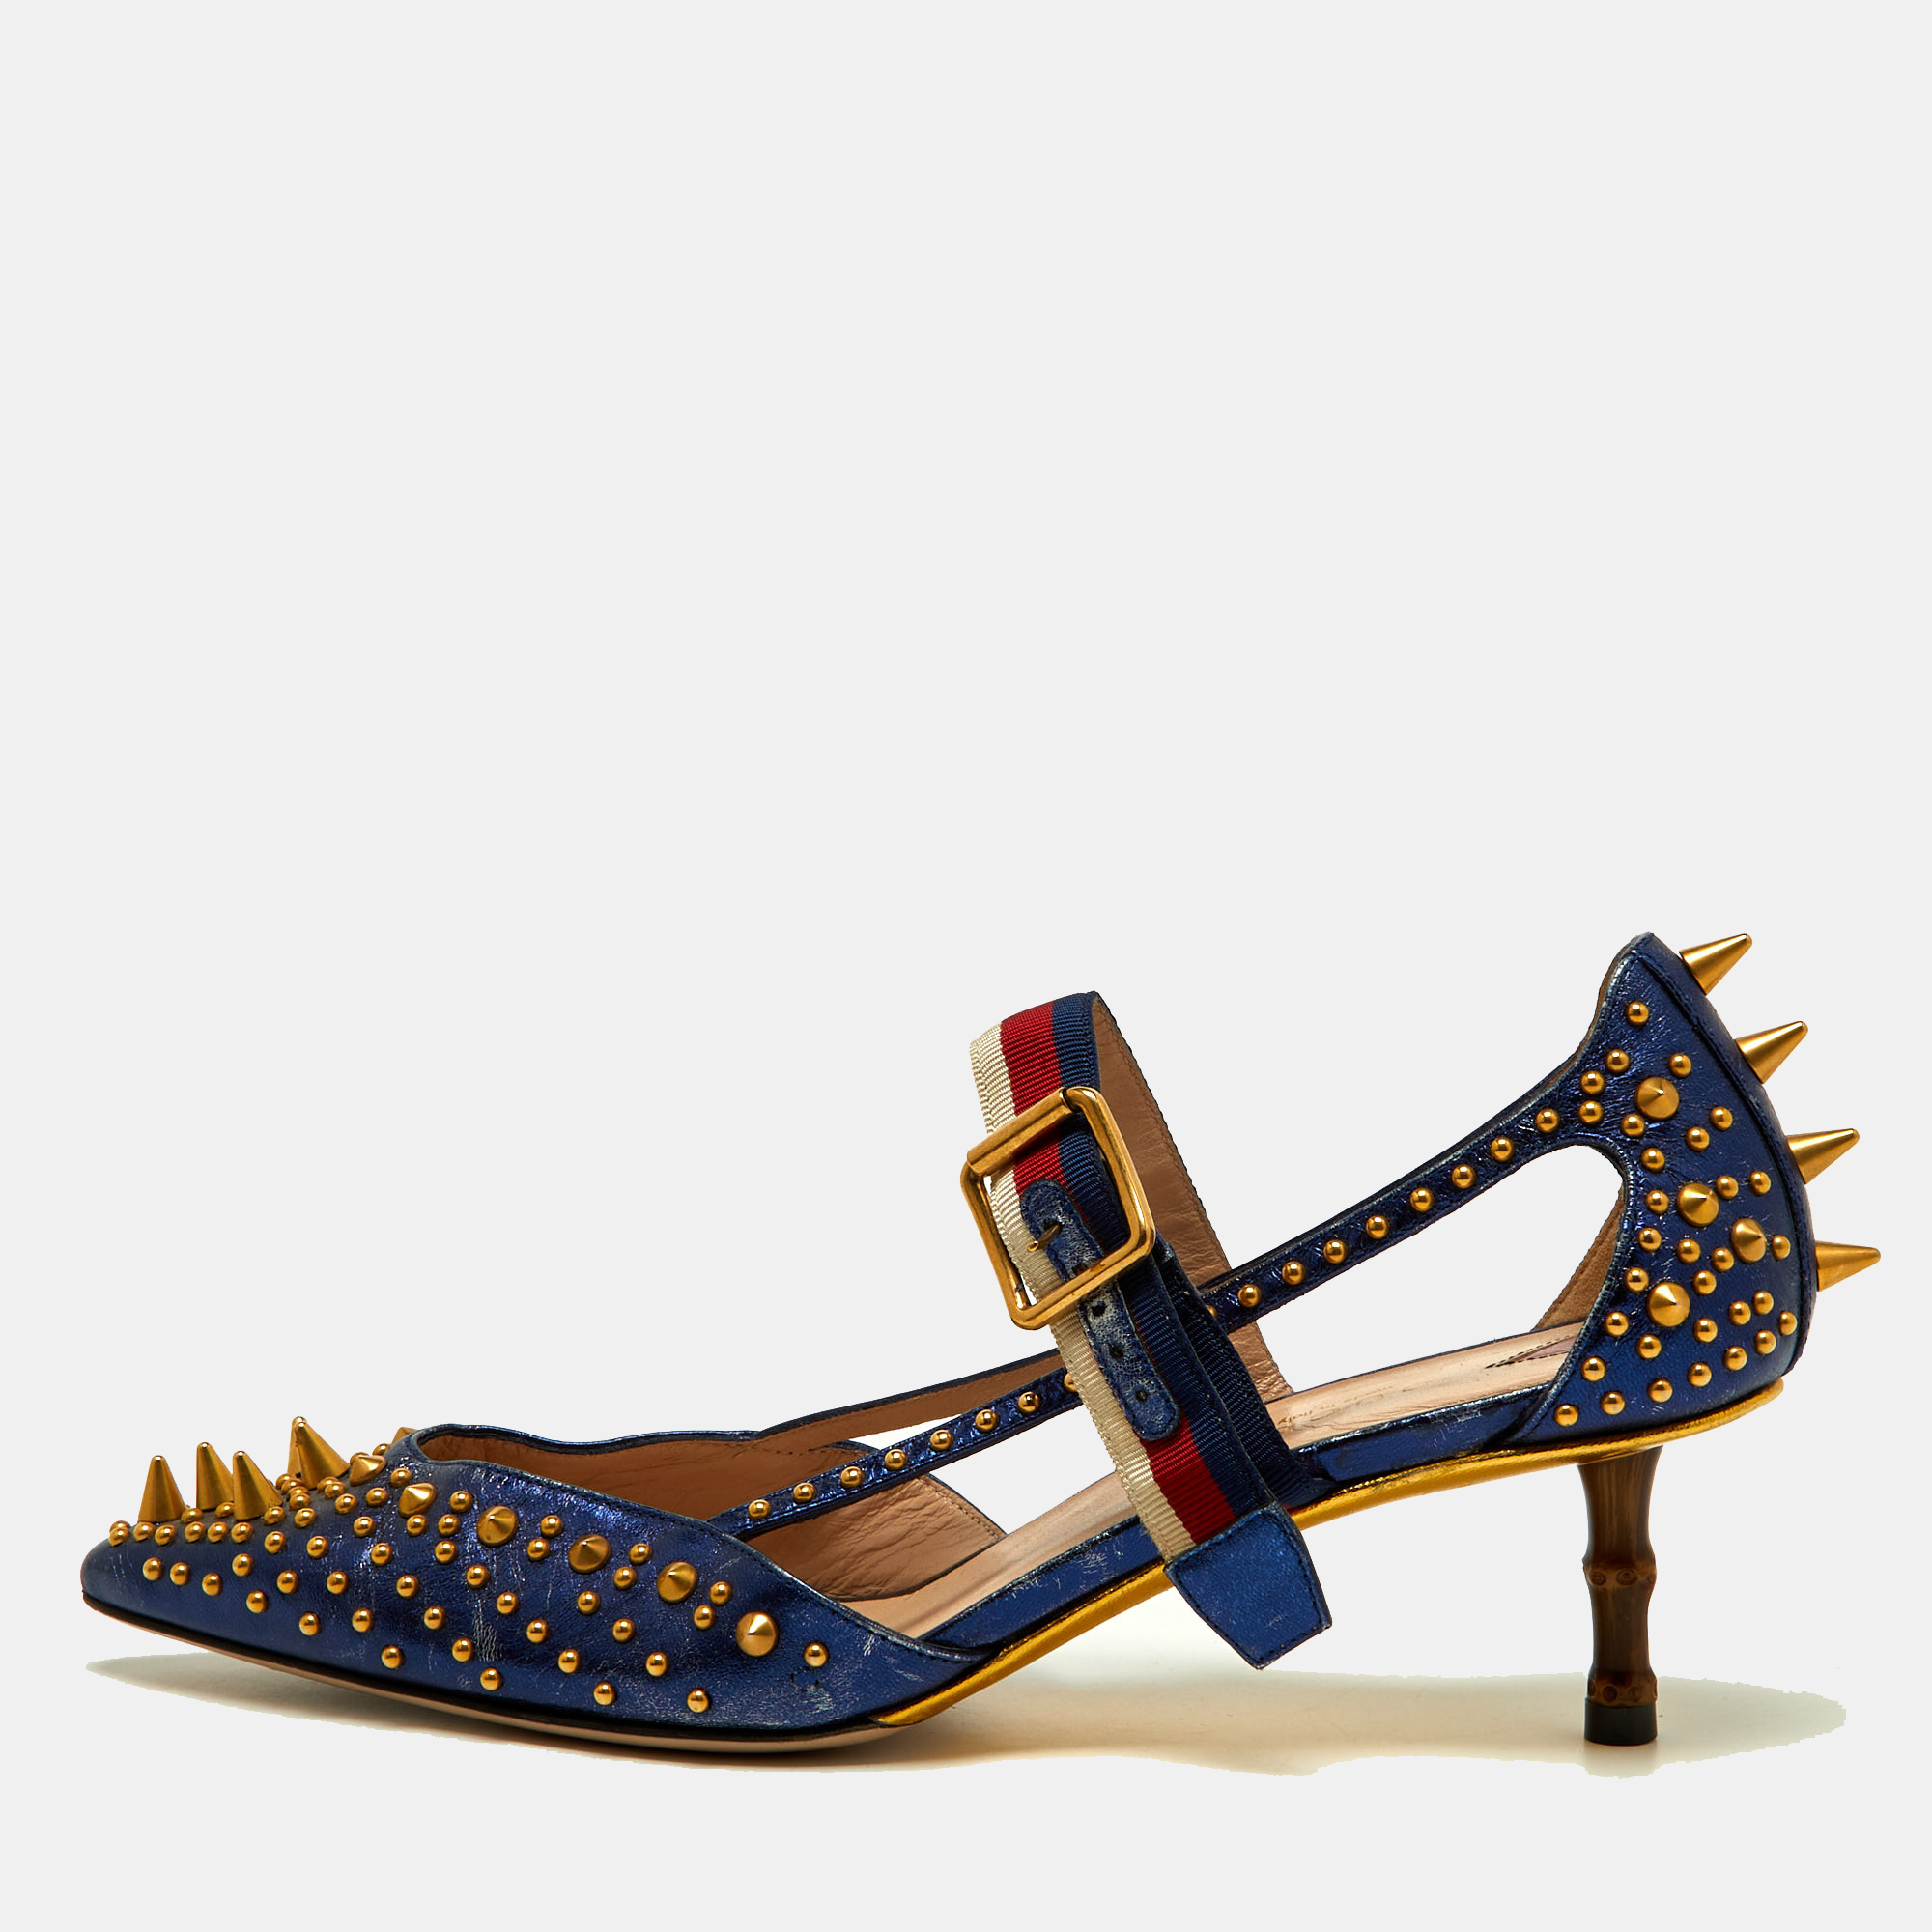 These pointed toe Unia pumps from Gucci have come straight from a shoe lovers dream. Crafted from blue leather detailed with gold tone studs all over along with signature Web straps on the ankle and are balanced on 5.5cm heels. The pumps are lovely and gorgeous